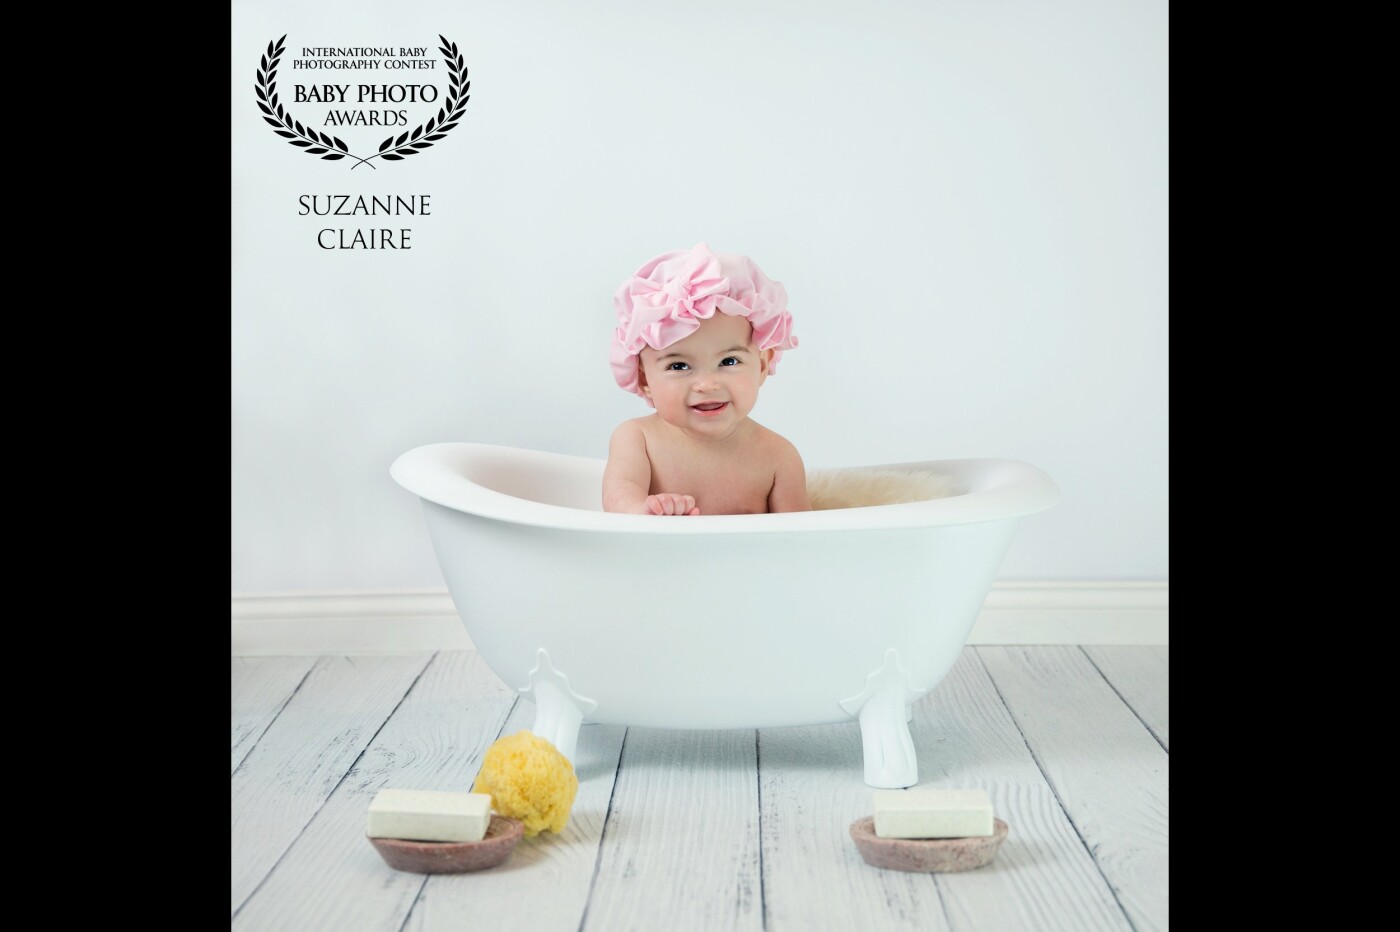 This beautiful little 7-month-old girl came for a fun photo shoot. I was so excited to try out my new idea with this little bath prop. Many great photos came from this photo shoot but this one was just perfect! It was a joy to work with such a happy baby!